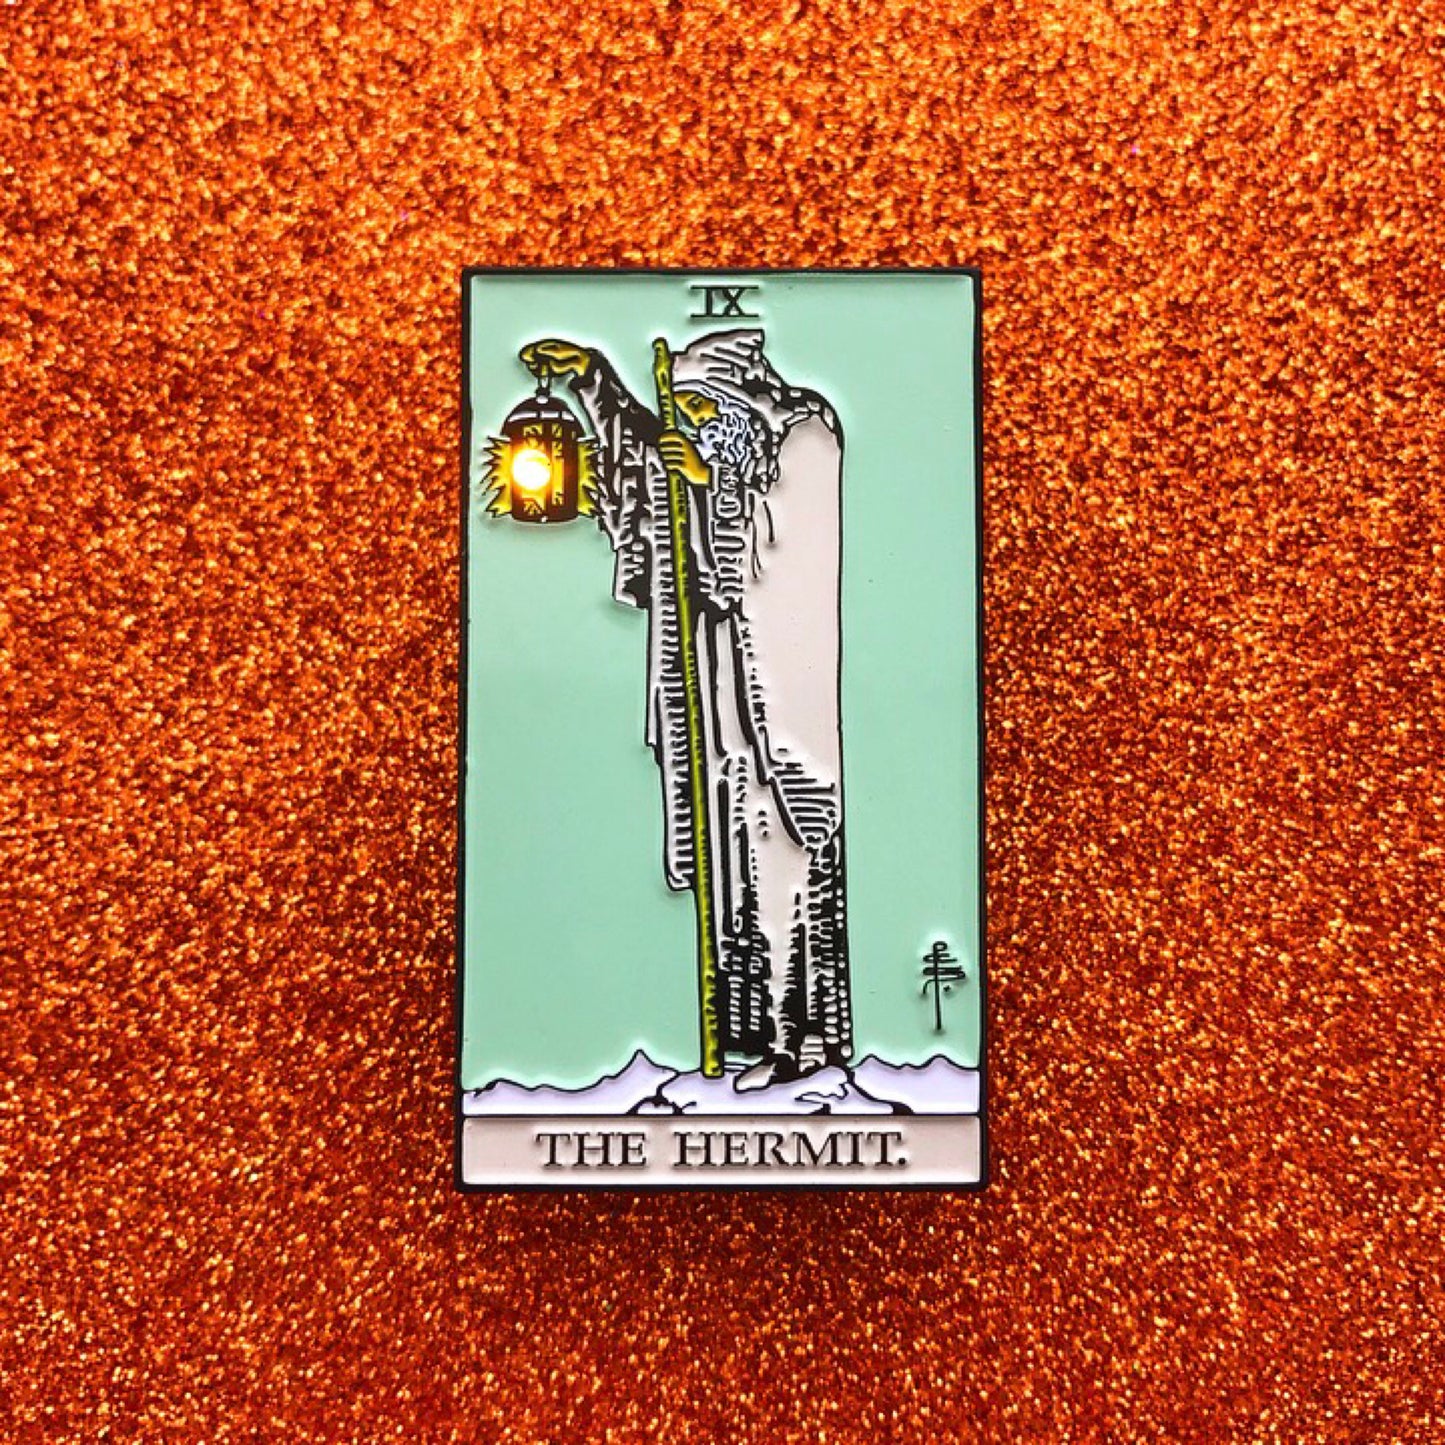 The Hermit Pin